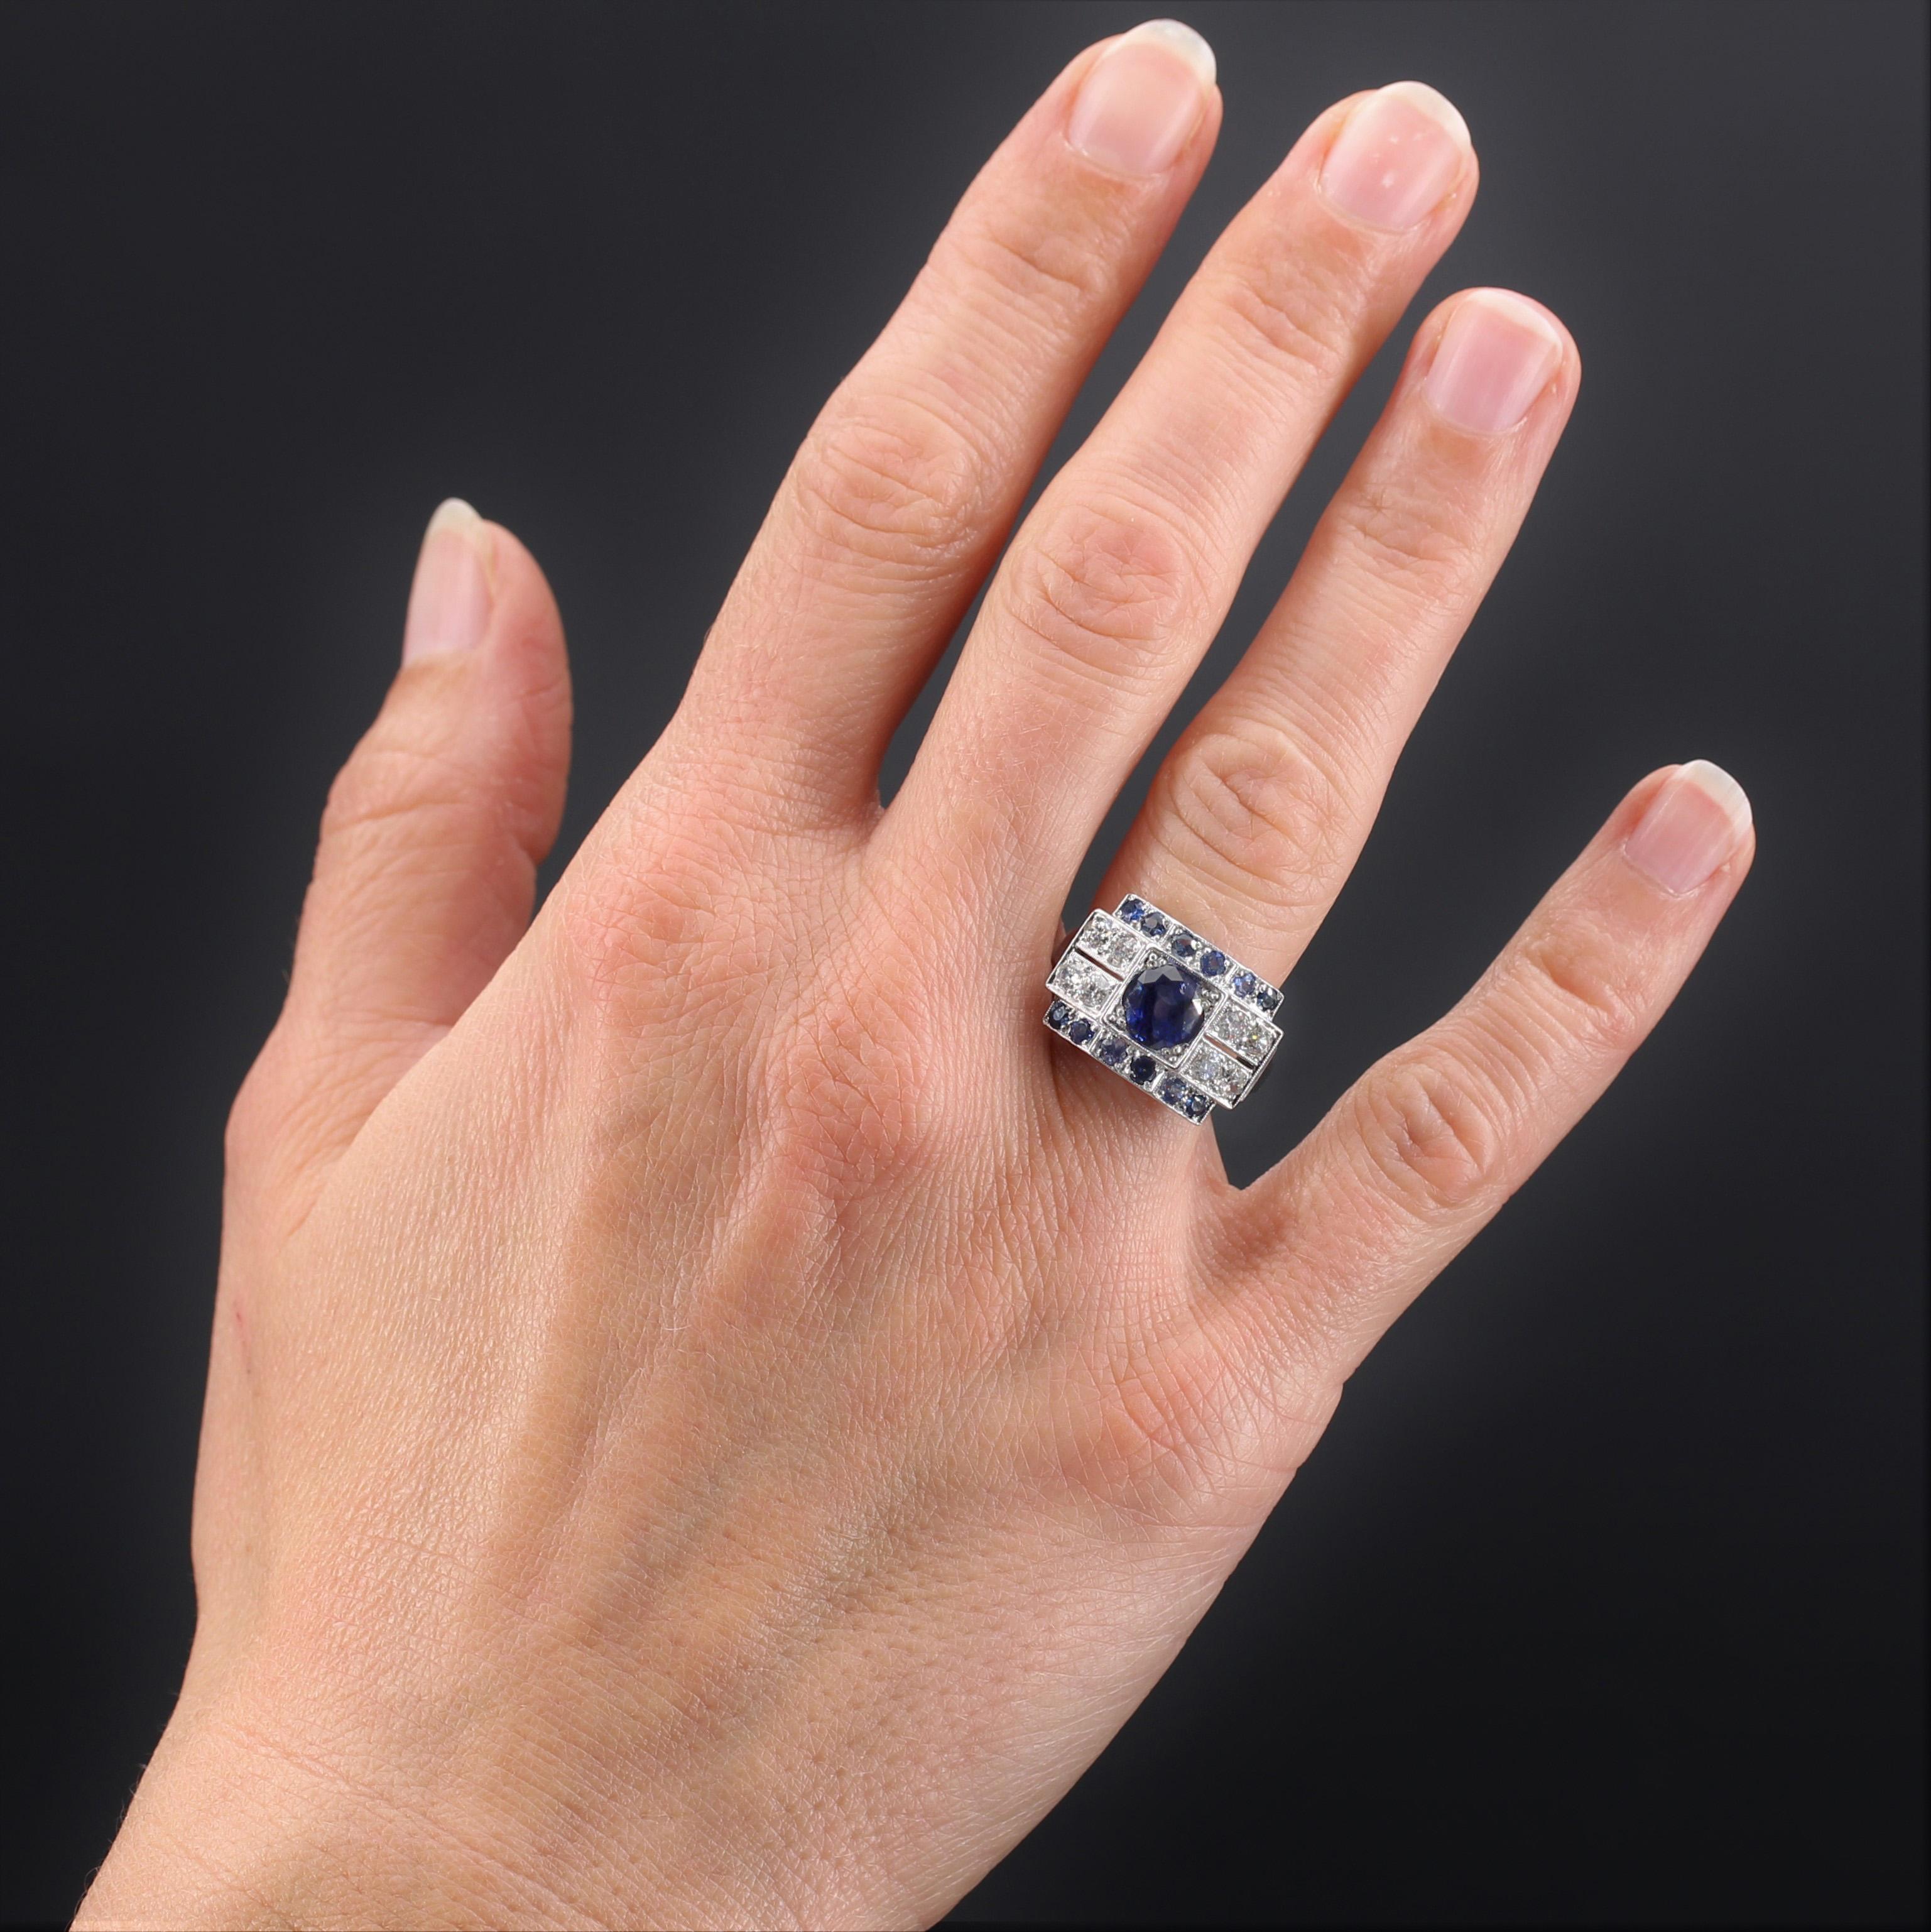 Ring in 18 karat white gold.
Magnificent art deco ring it is formed of a geometrical and curved setting to follow the shape of the finger. A round sapphire, of an intense blue, is set on top, framed by 2 lines of 6 round sapphires, and shouldered by